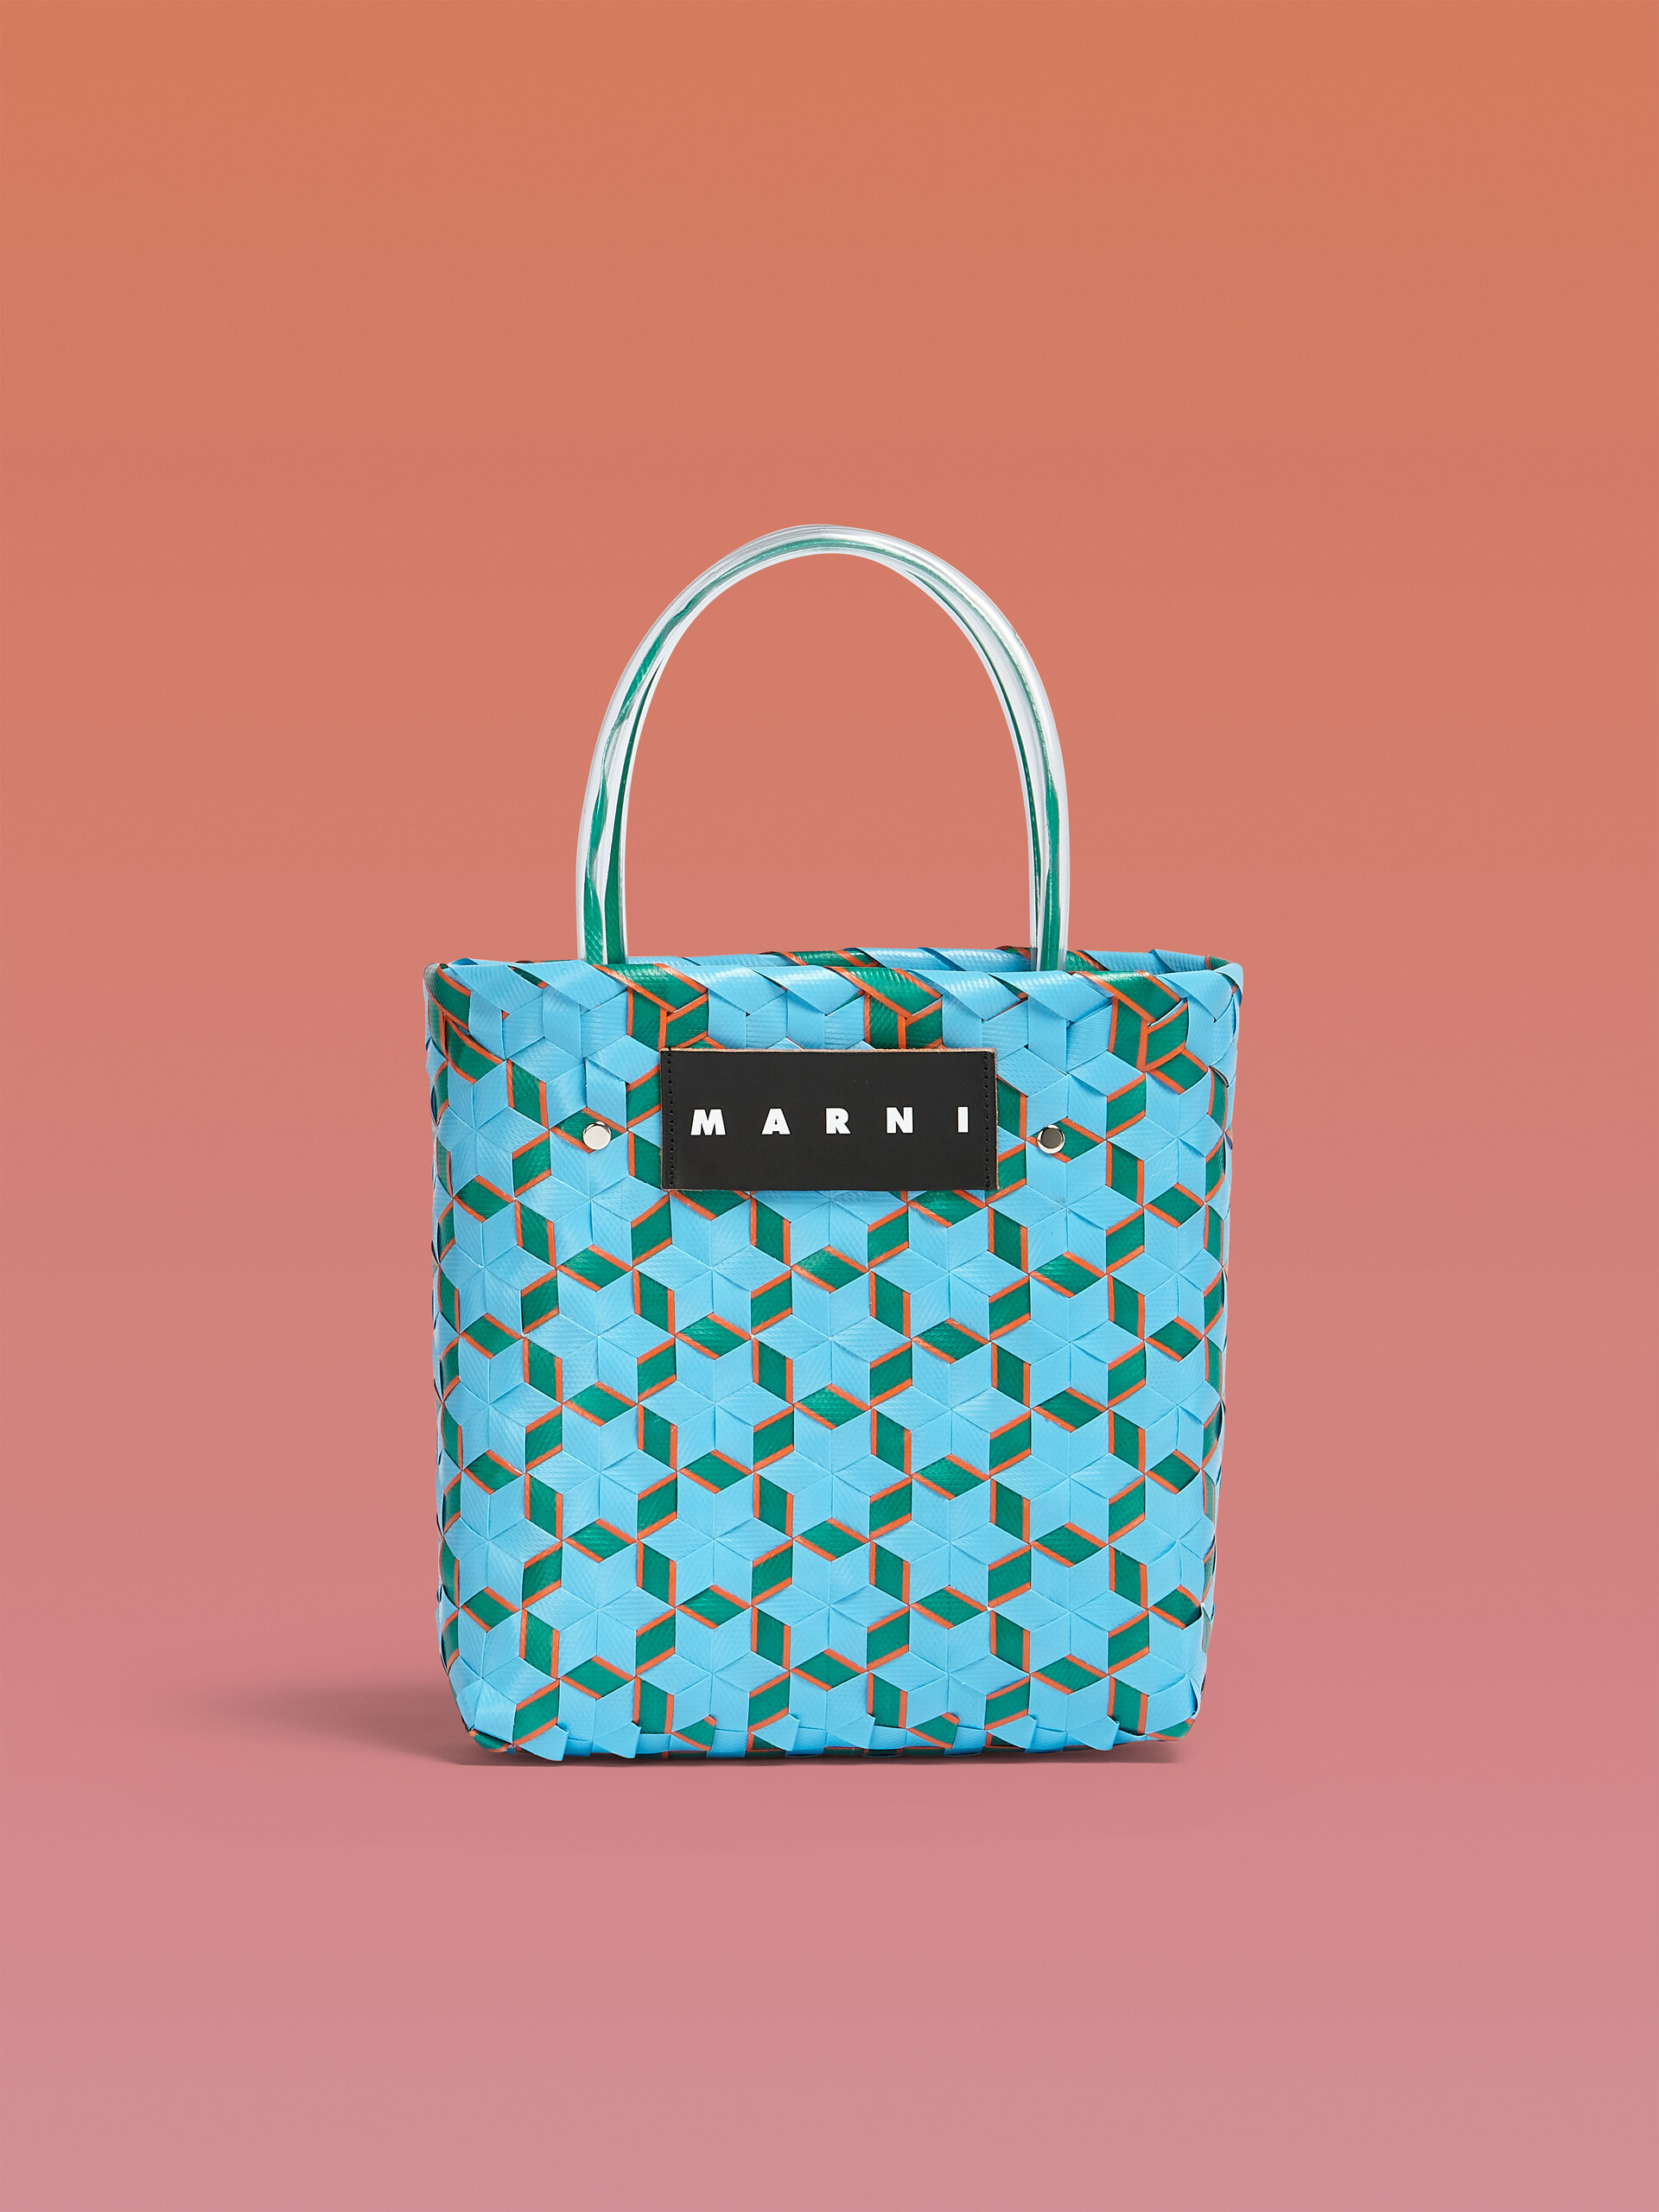 MARNI MARKET bag in pale blue star woven material - Bags - Image 1